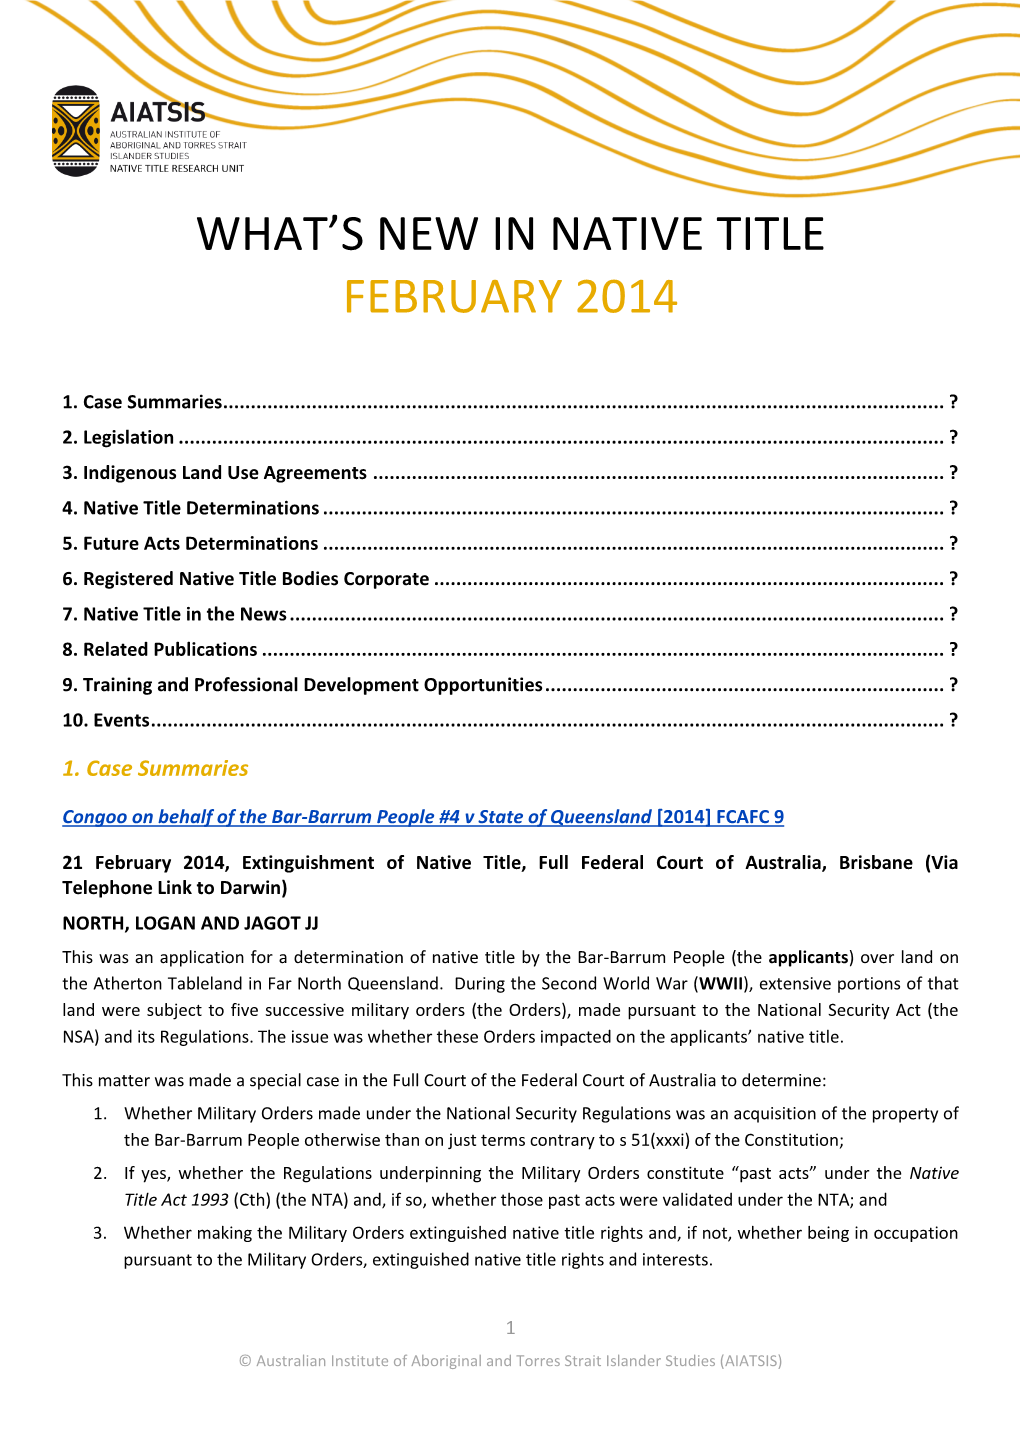 What's New in Native Title February 2014